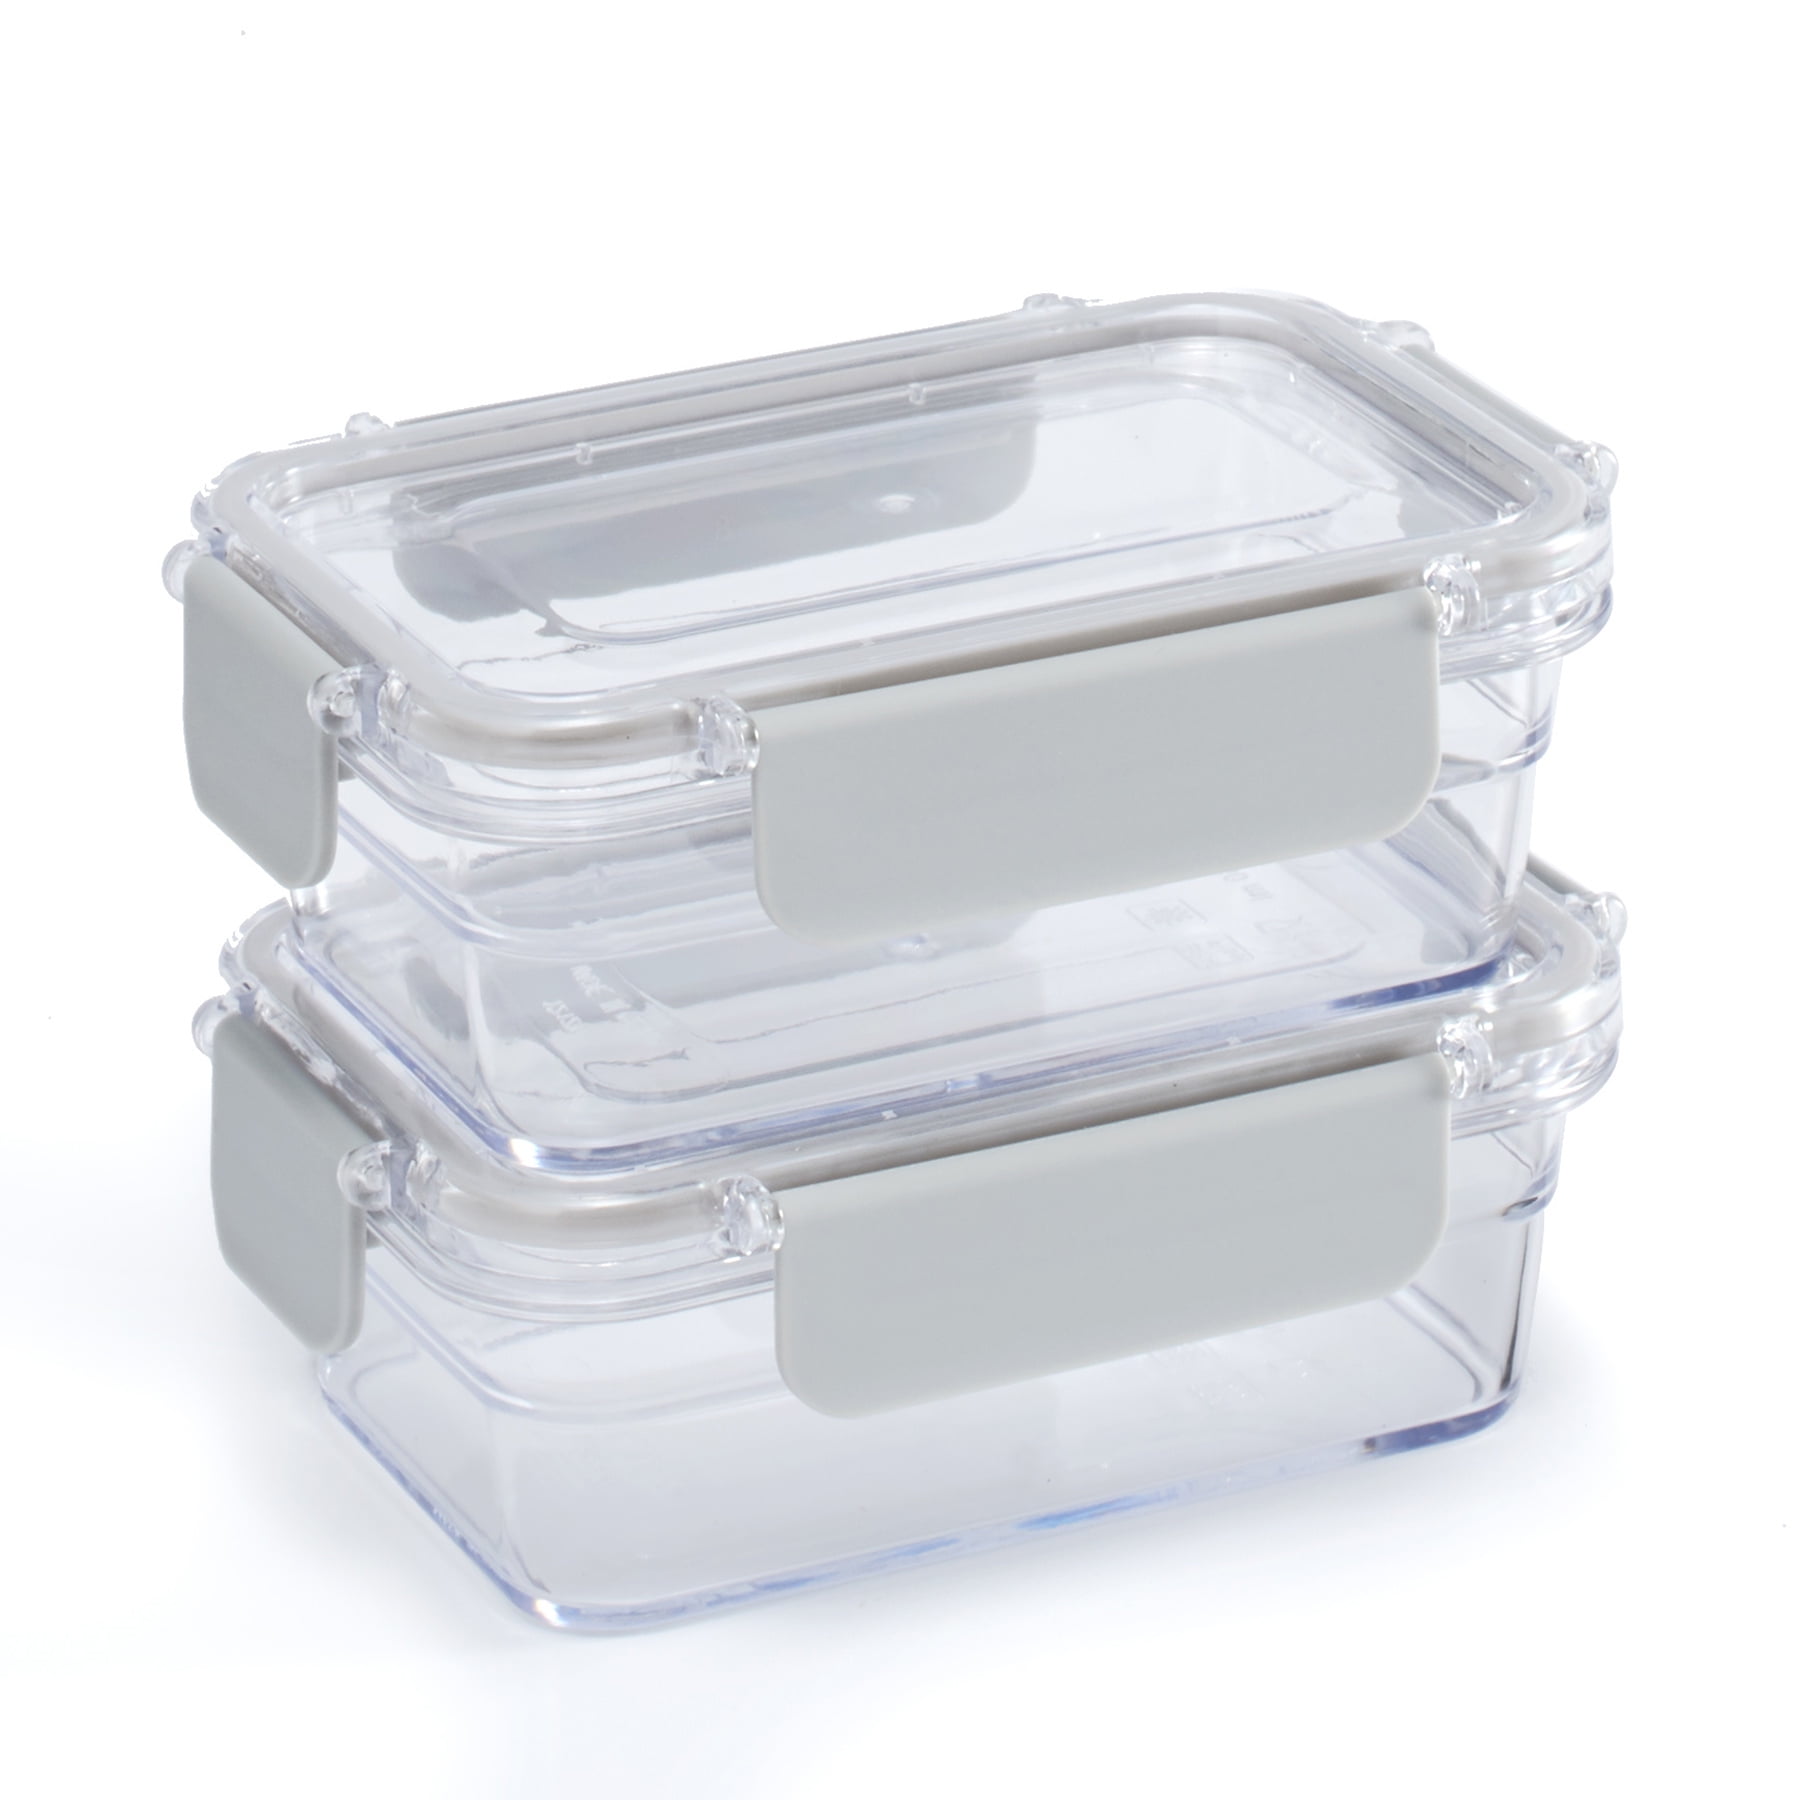 Mainstays 1.9 Cup Rectangular Tritan Stain-Proof Food Storage Container, Set of 2